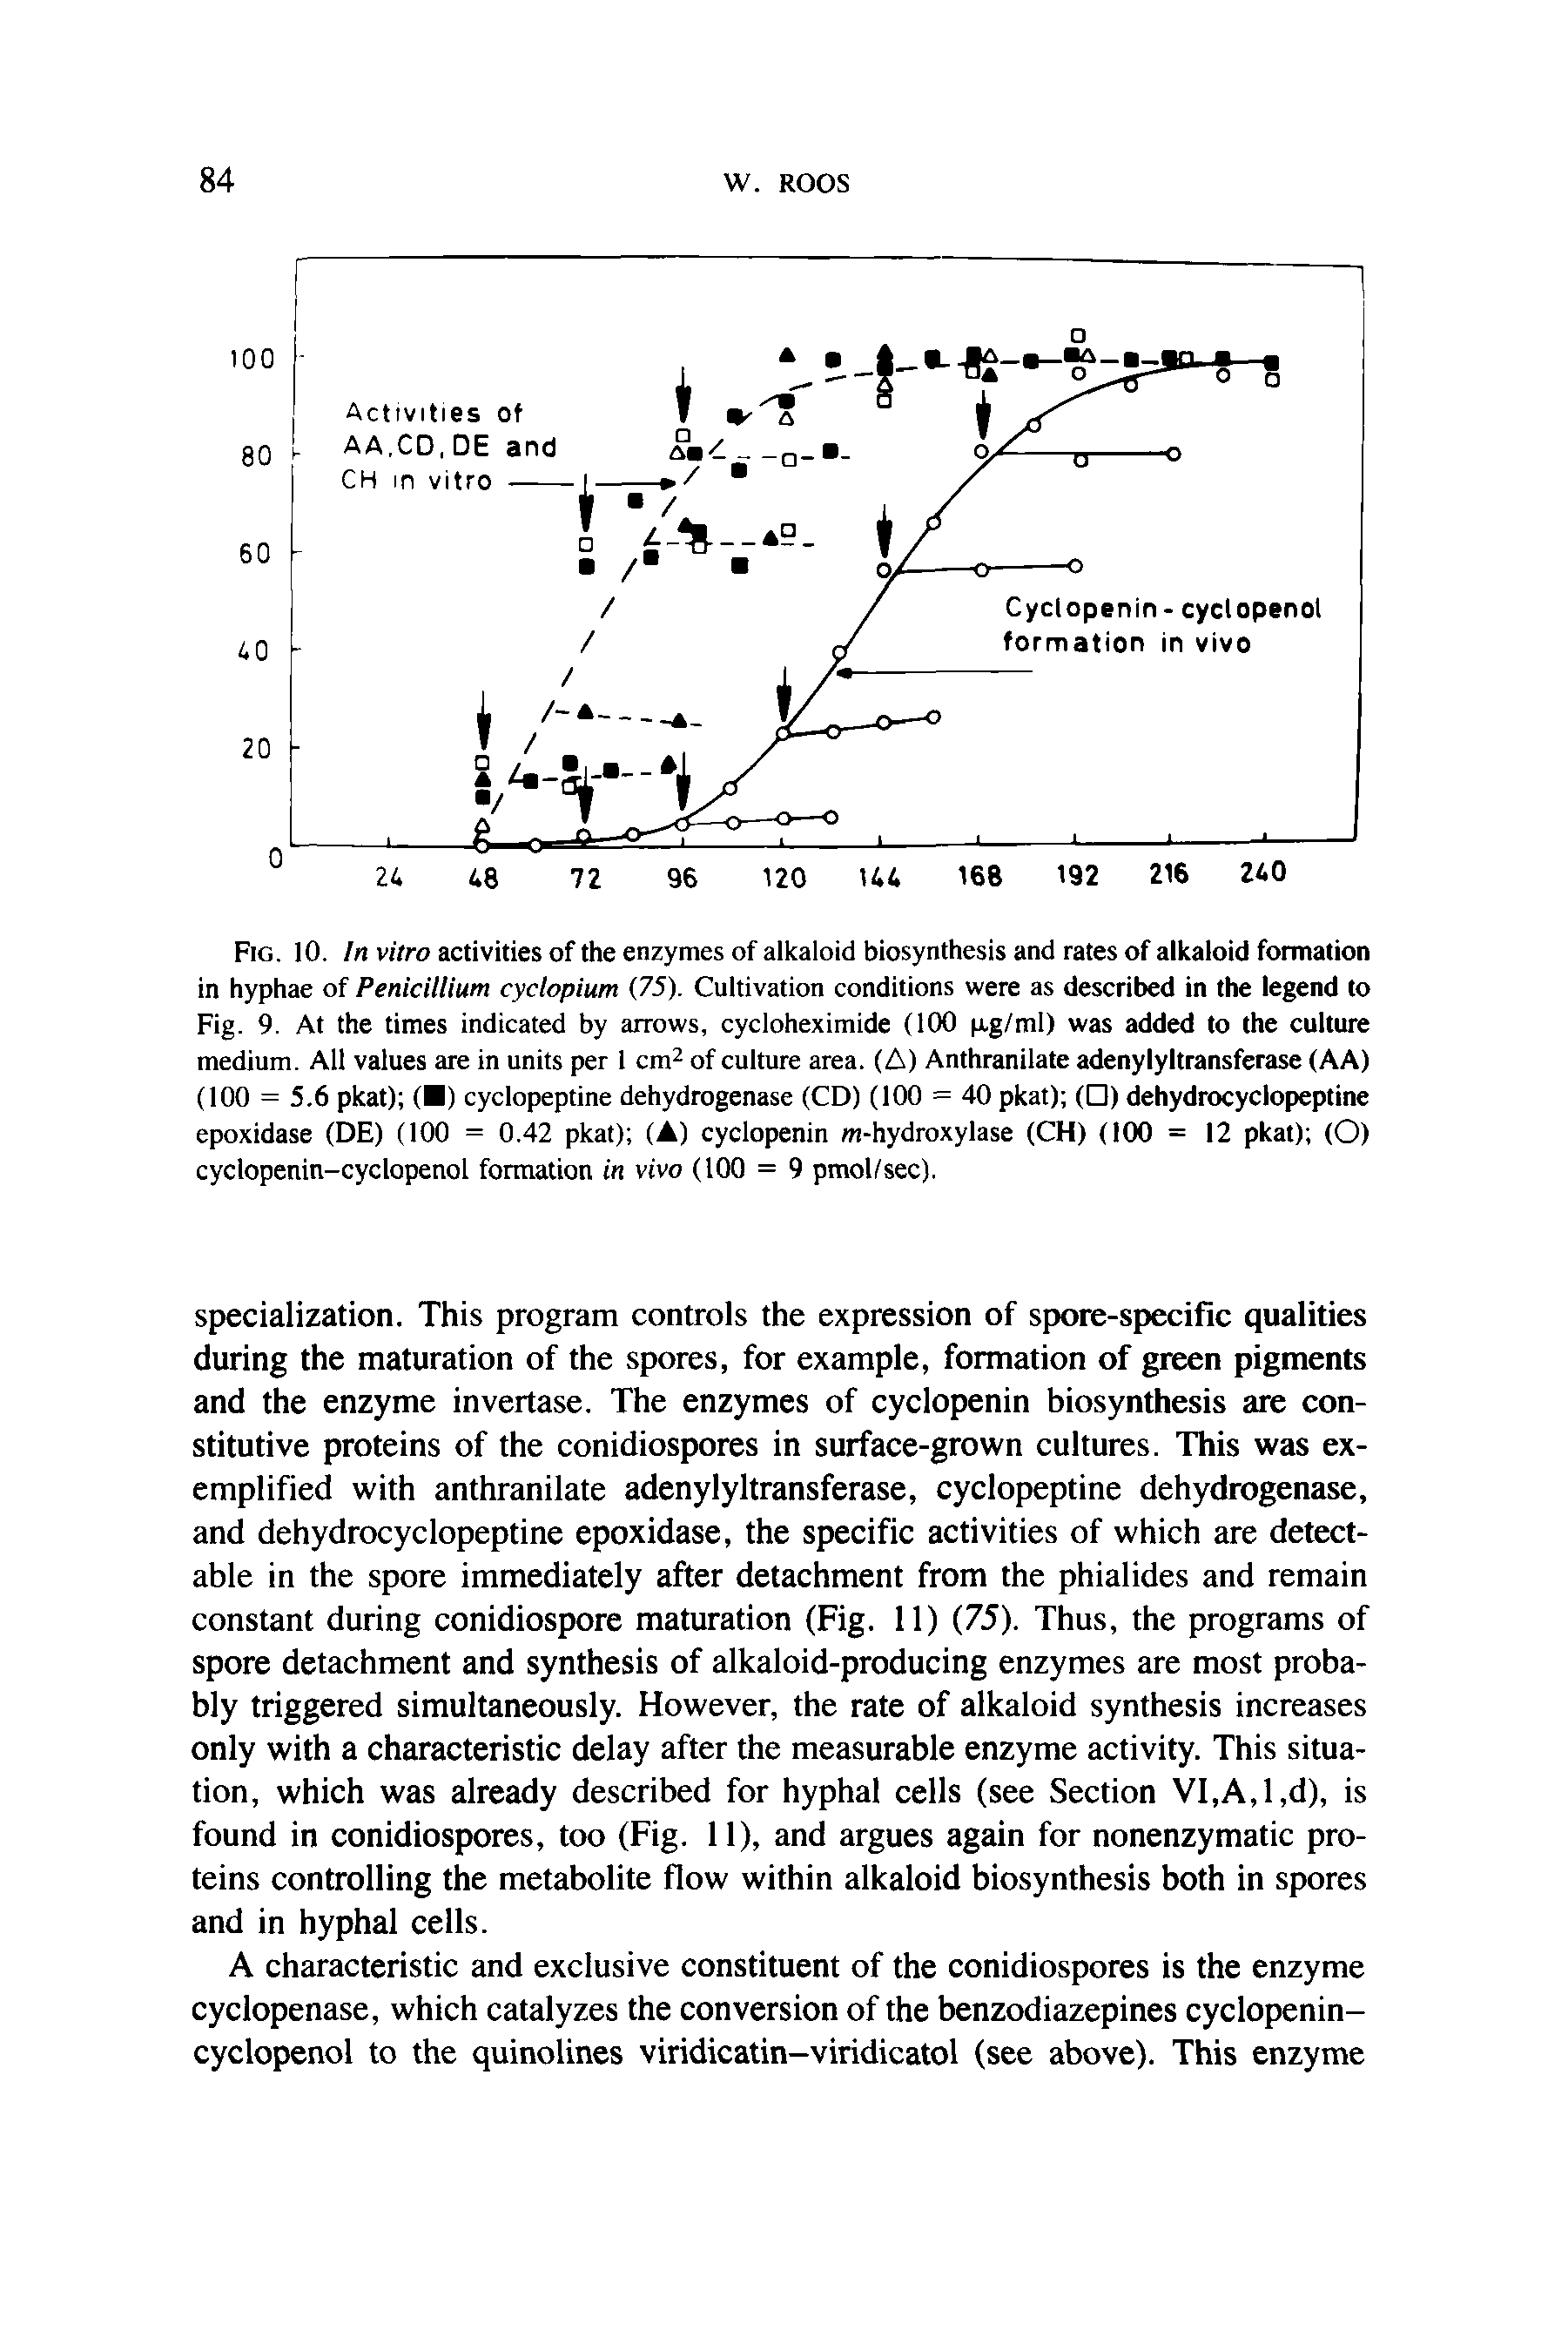 Fig. 10. In vitro activities of the enzymes of alkaloid biosynthesis and rates of alkaloid formation in hyphae of Penicitlium cyclopium (75). Cultivation conditions were as described in the legend to Fig. 9. At the times indicated by arrows, cycloheximide (100 p.g/ml) was added to the culture medium. All values are in units per 1 cm of culture area. (A) Anthranilate adenylyltransferase (AA) (100 = 5.6 pkat) ( ) cyclopeptine dehydrogenase (CD) (100 = 40 pkat) ( ) dehydrocyclopeptine epoxidase (DE) (100 = 0.42 pkat) (A) cyclopenin m-hydroxylase (CH) (100 = 12 pkat) (O) cyclopenin-cyclopenol formation in vivo (100 = 9 pmol/sec).